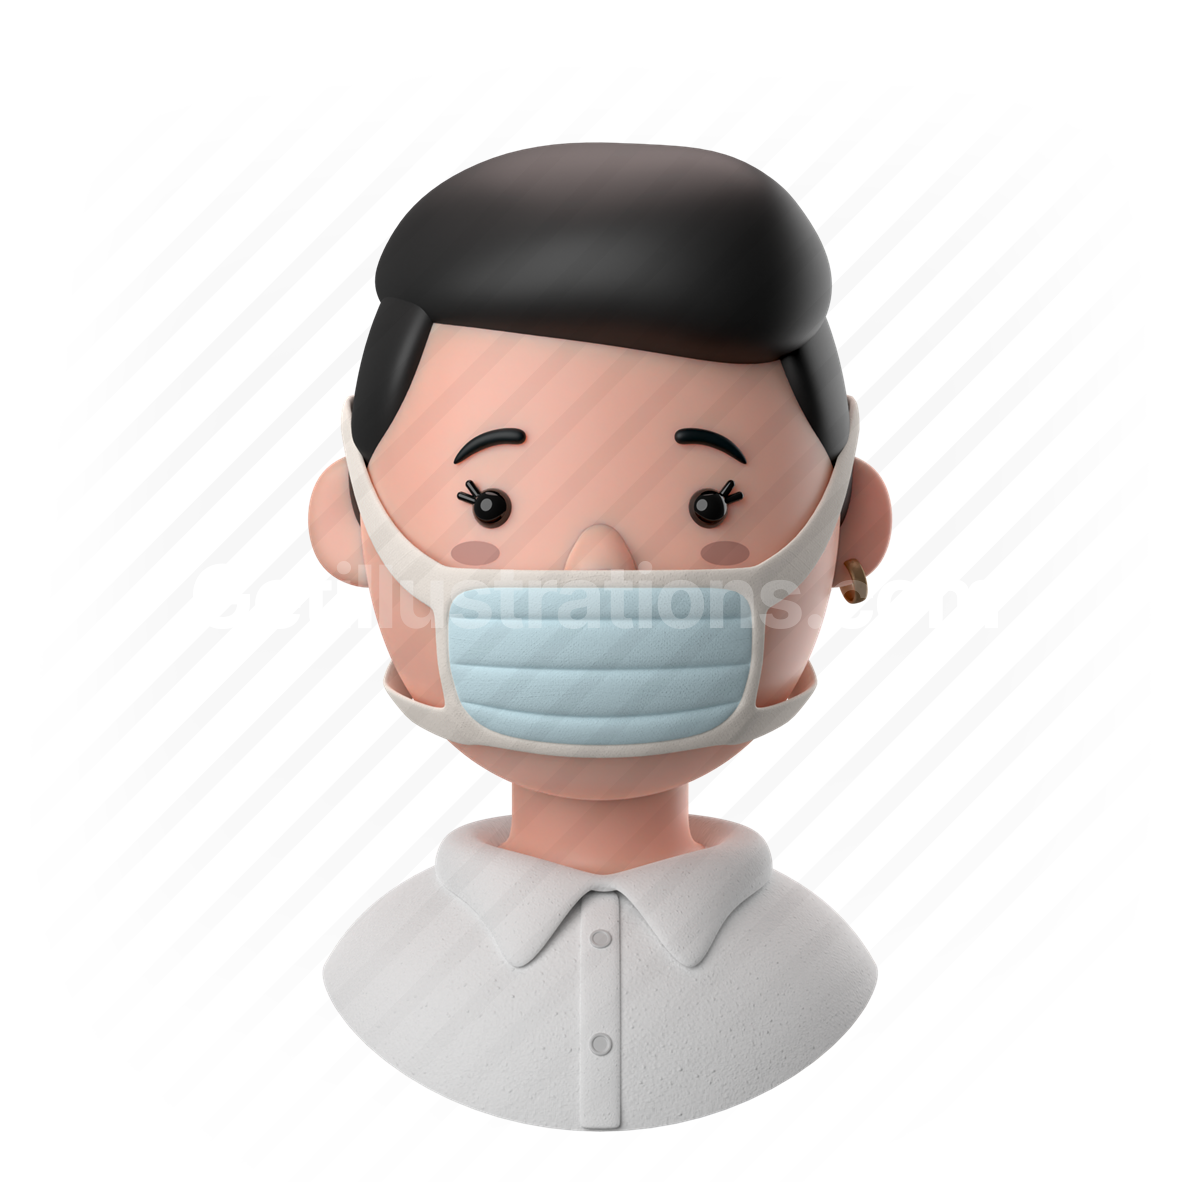 woman, female, person, people, short hair, face mask, mask, earring, shirt